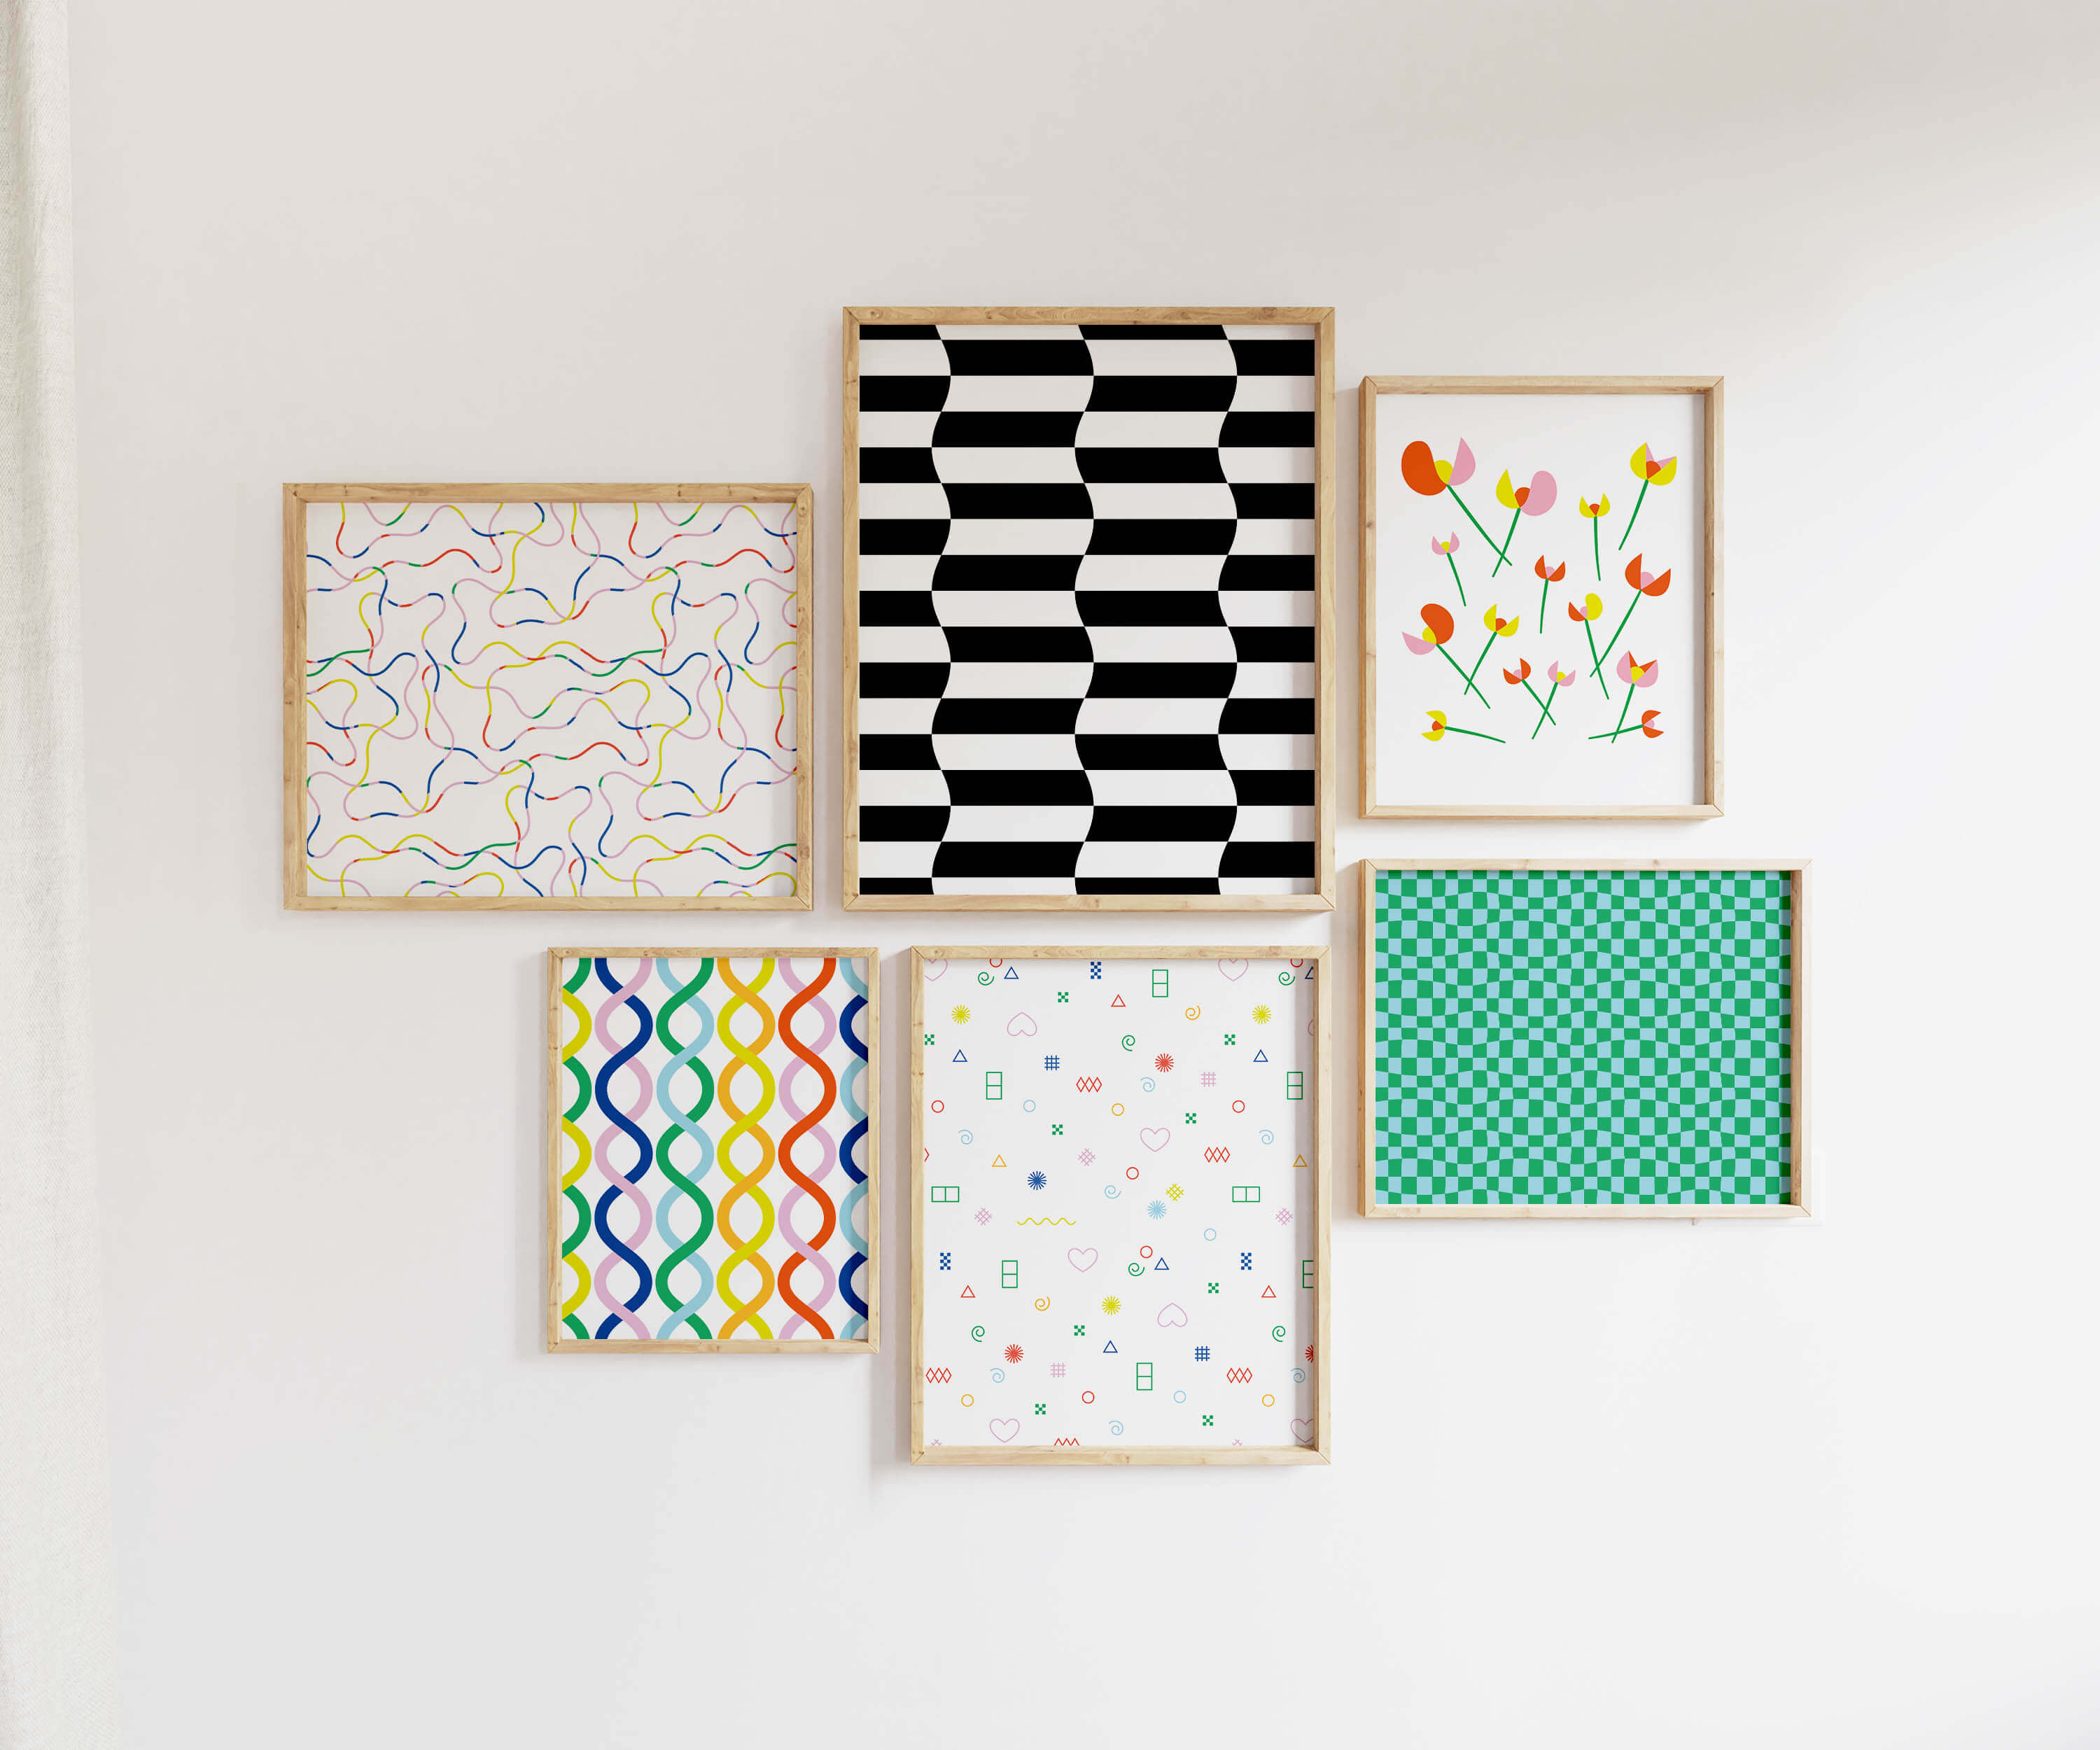 Gallery wall of colorful contemporary art prints of floral, abstract, checker and grid pattern art prints. Graphic, bold, vaguely mid-century inspired art. Made in USA by My Darlin' @mydarlin_bk